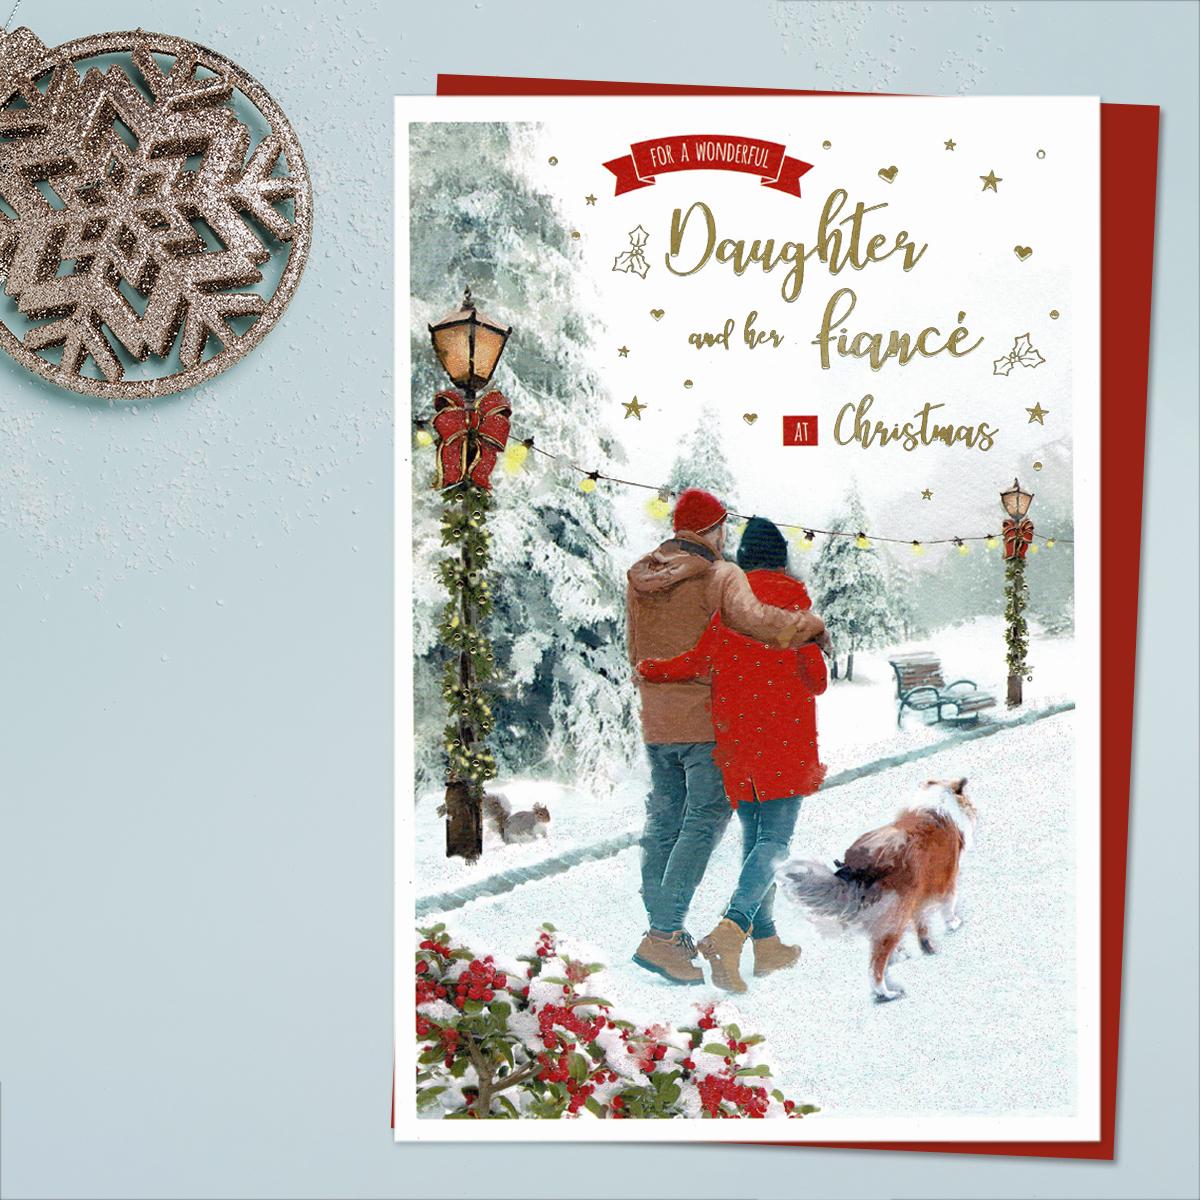 Daughter & Fiancé At Christmas Card Front Image